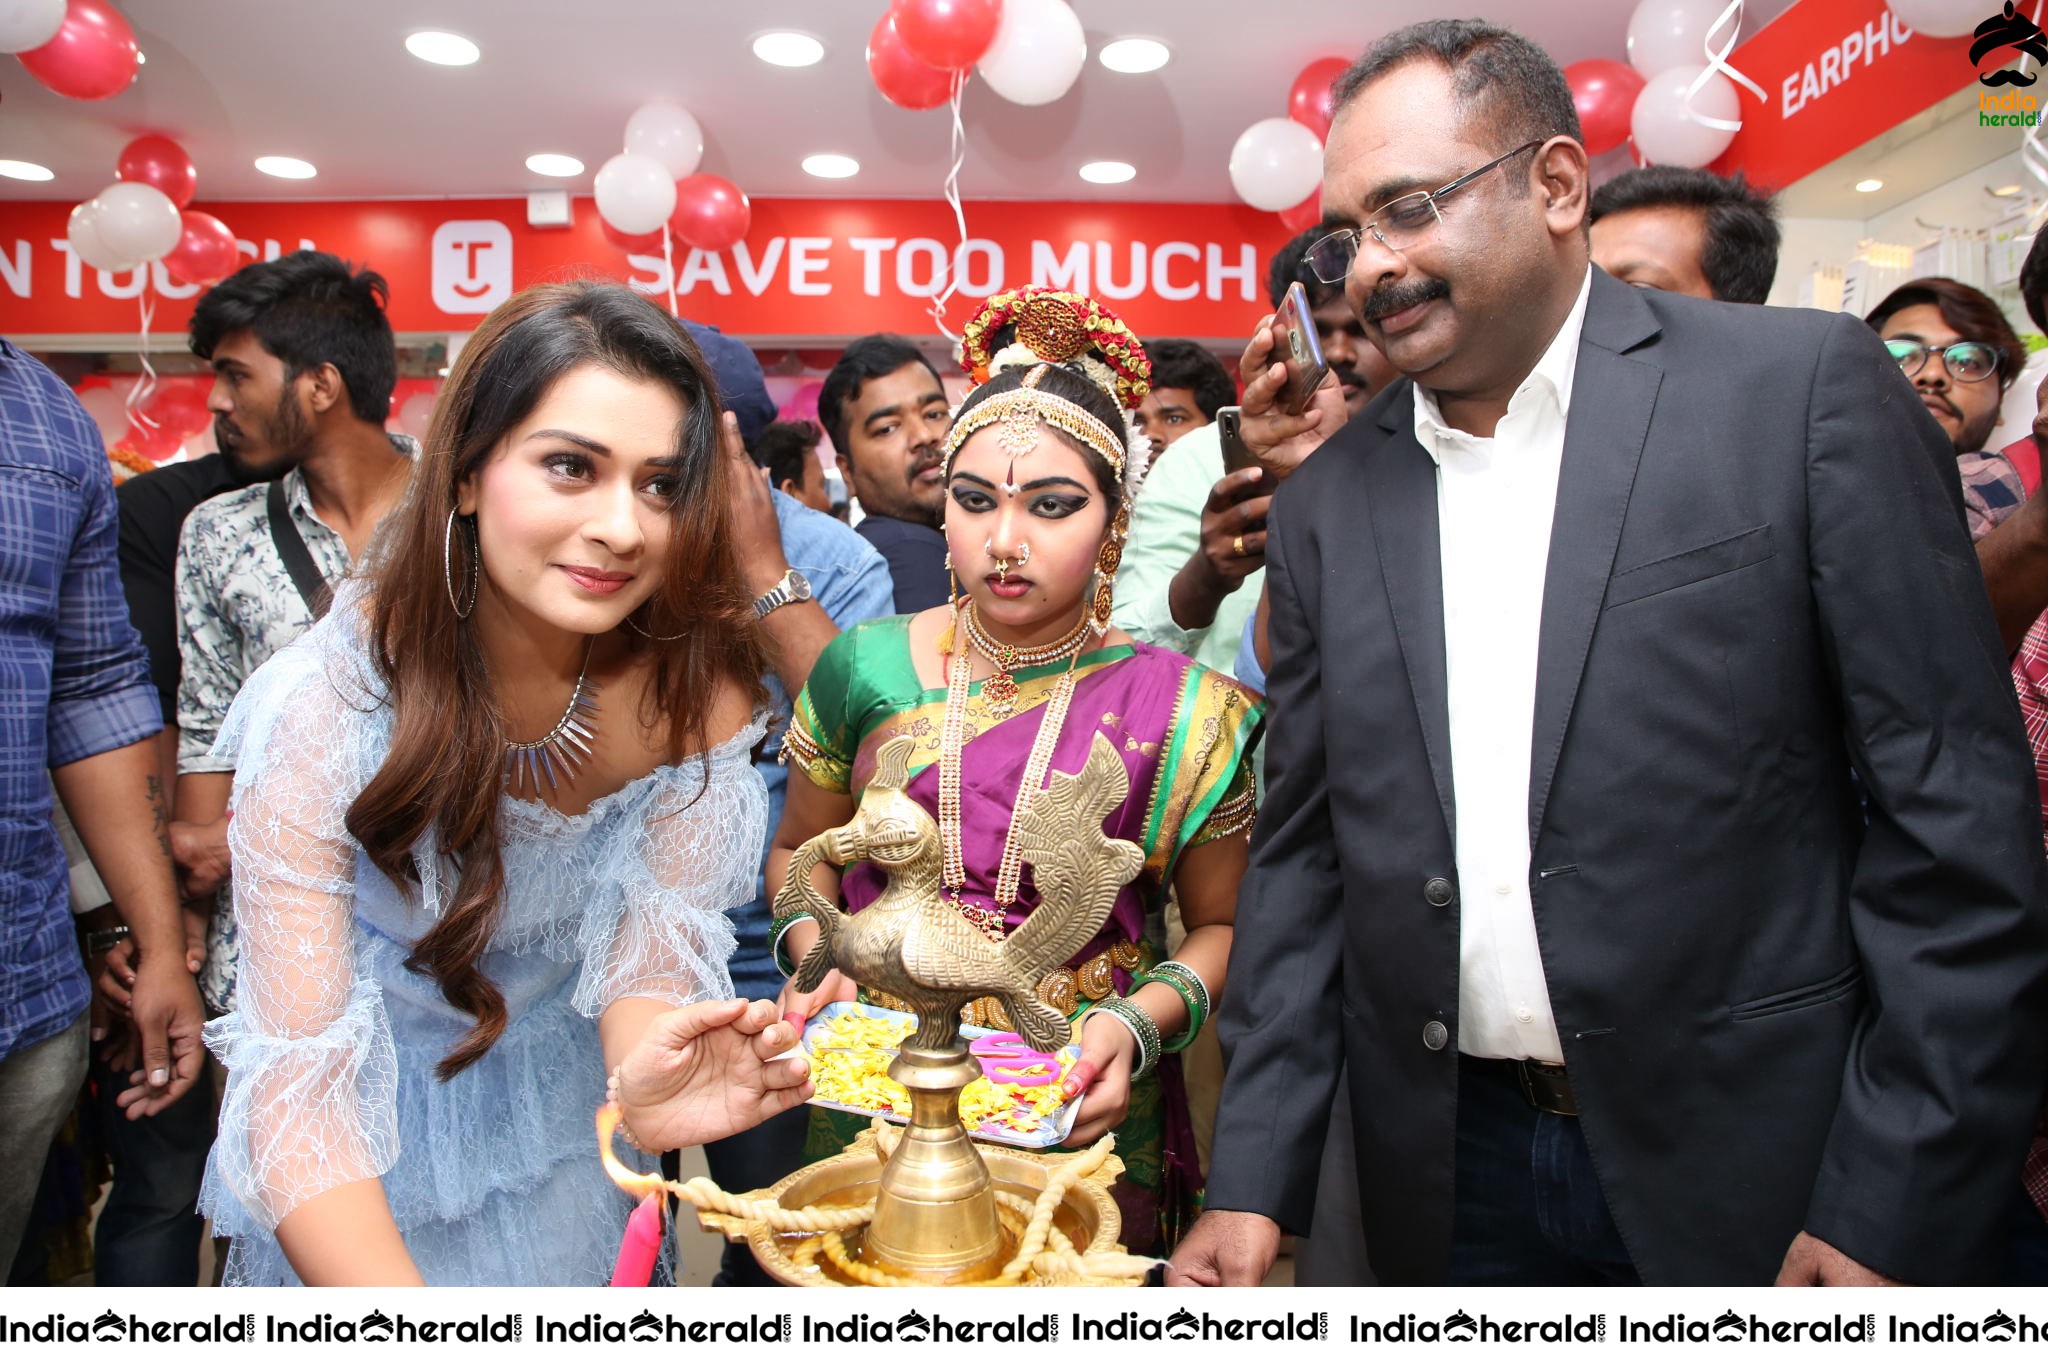 Payal Rajput at an Opening of Mobile Shop